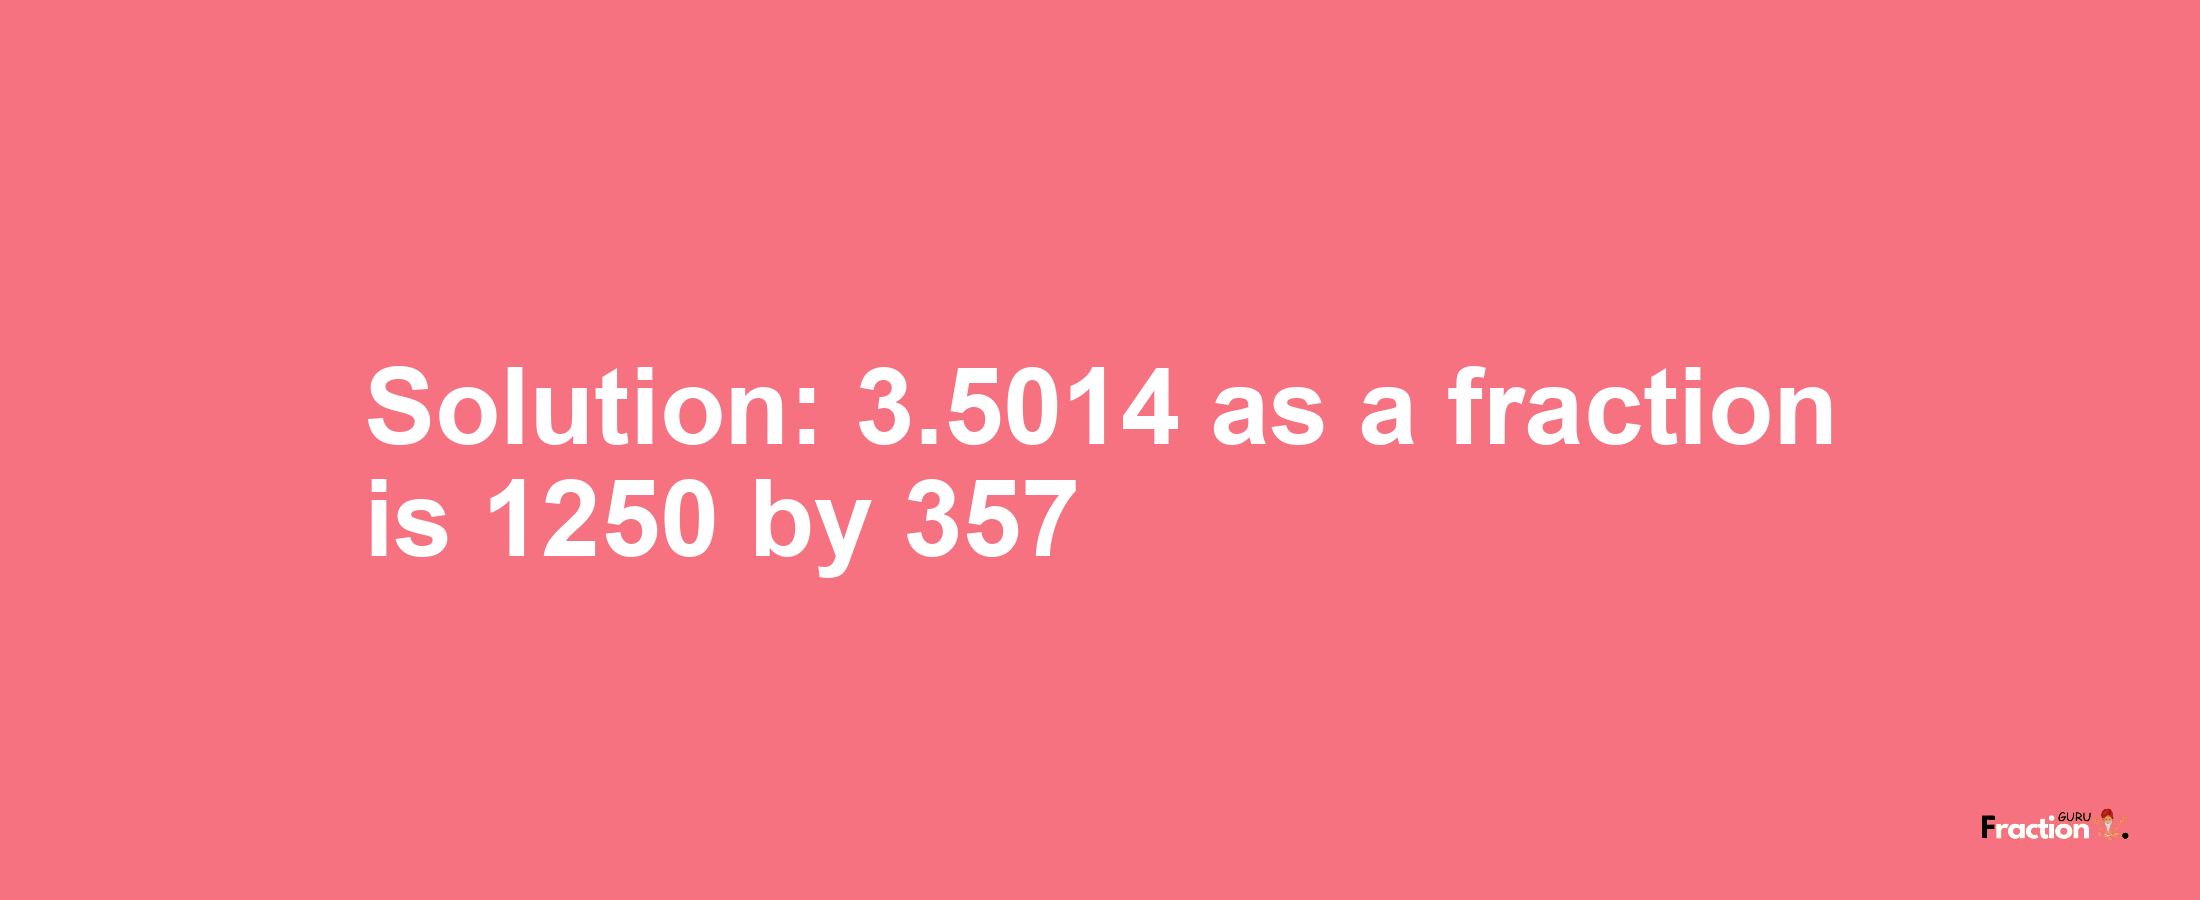 Solution:3.5014 as a fraction is 1250/357